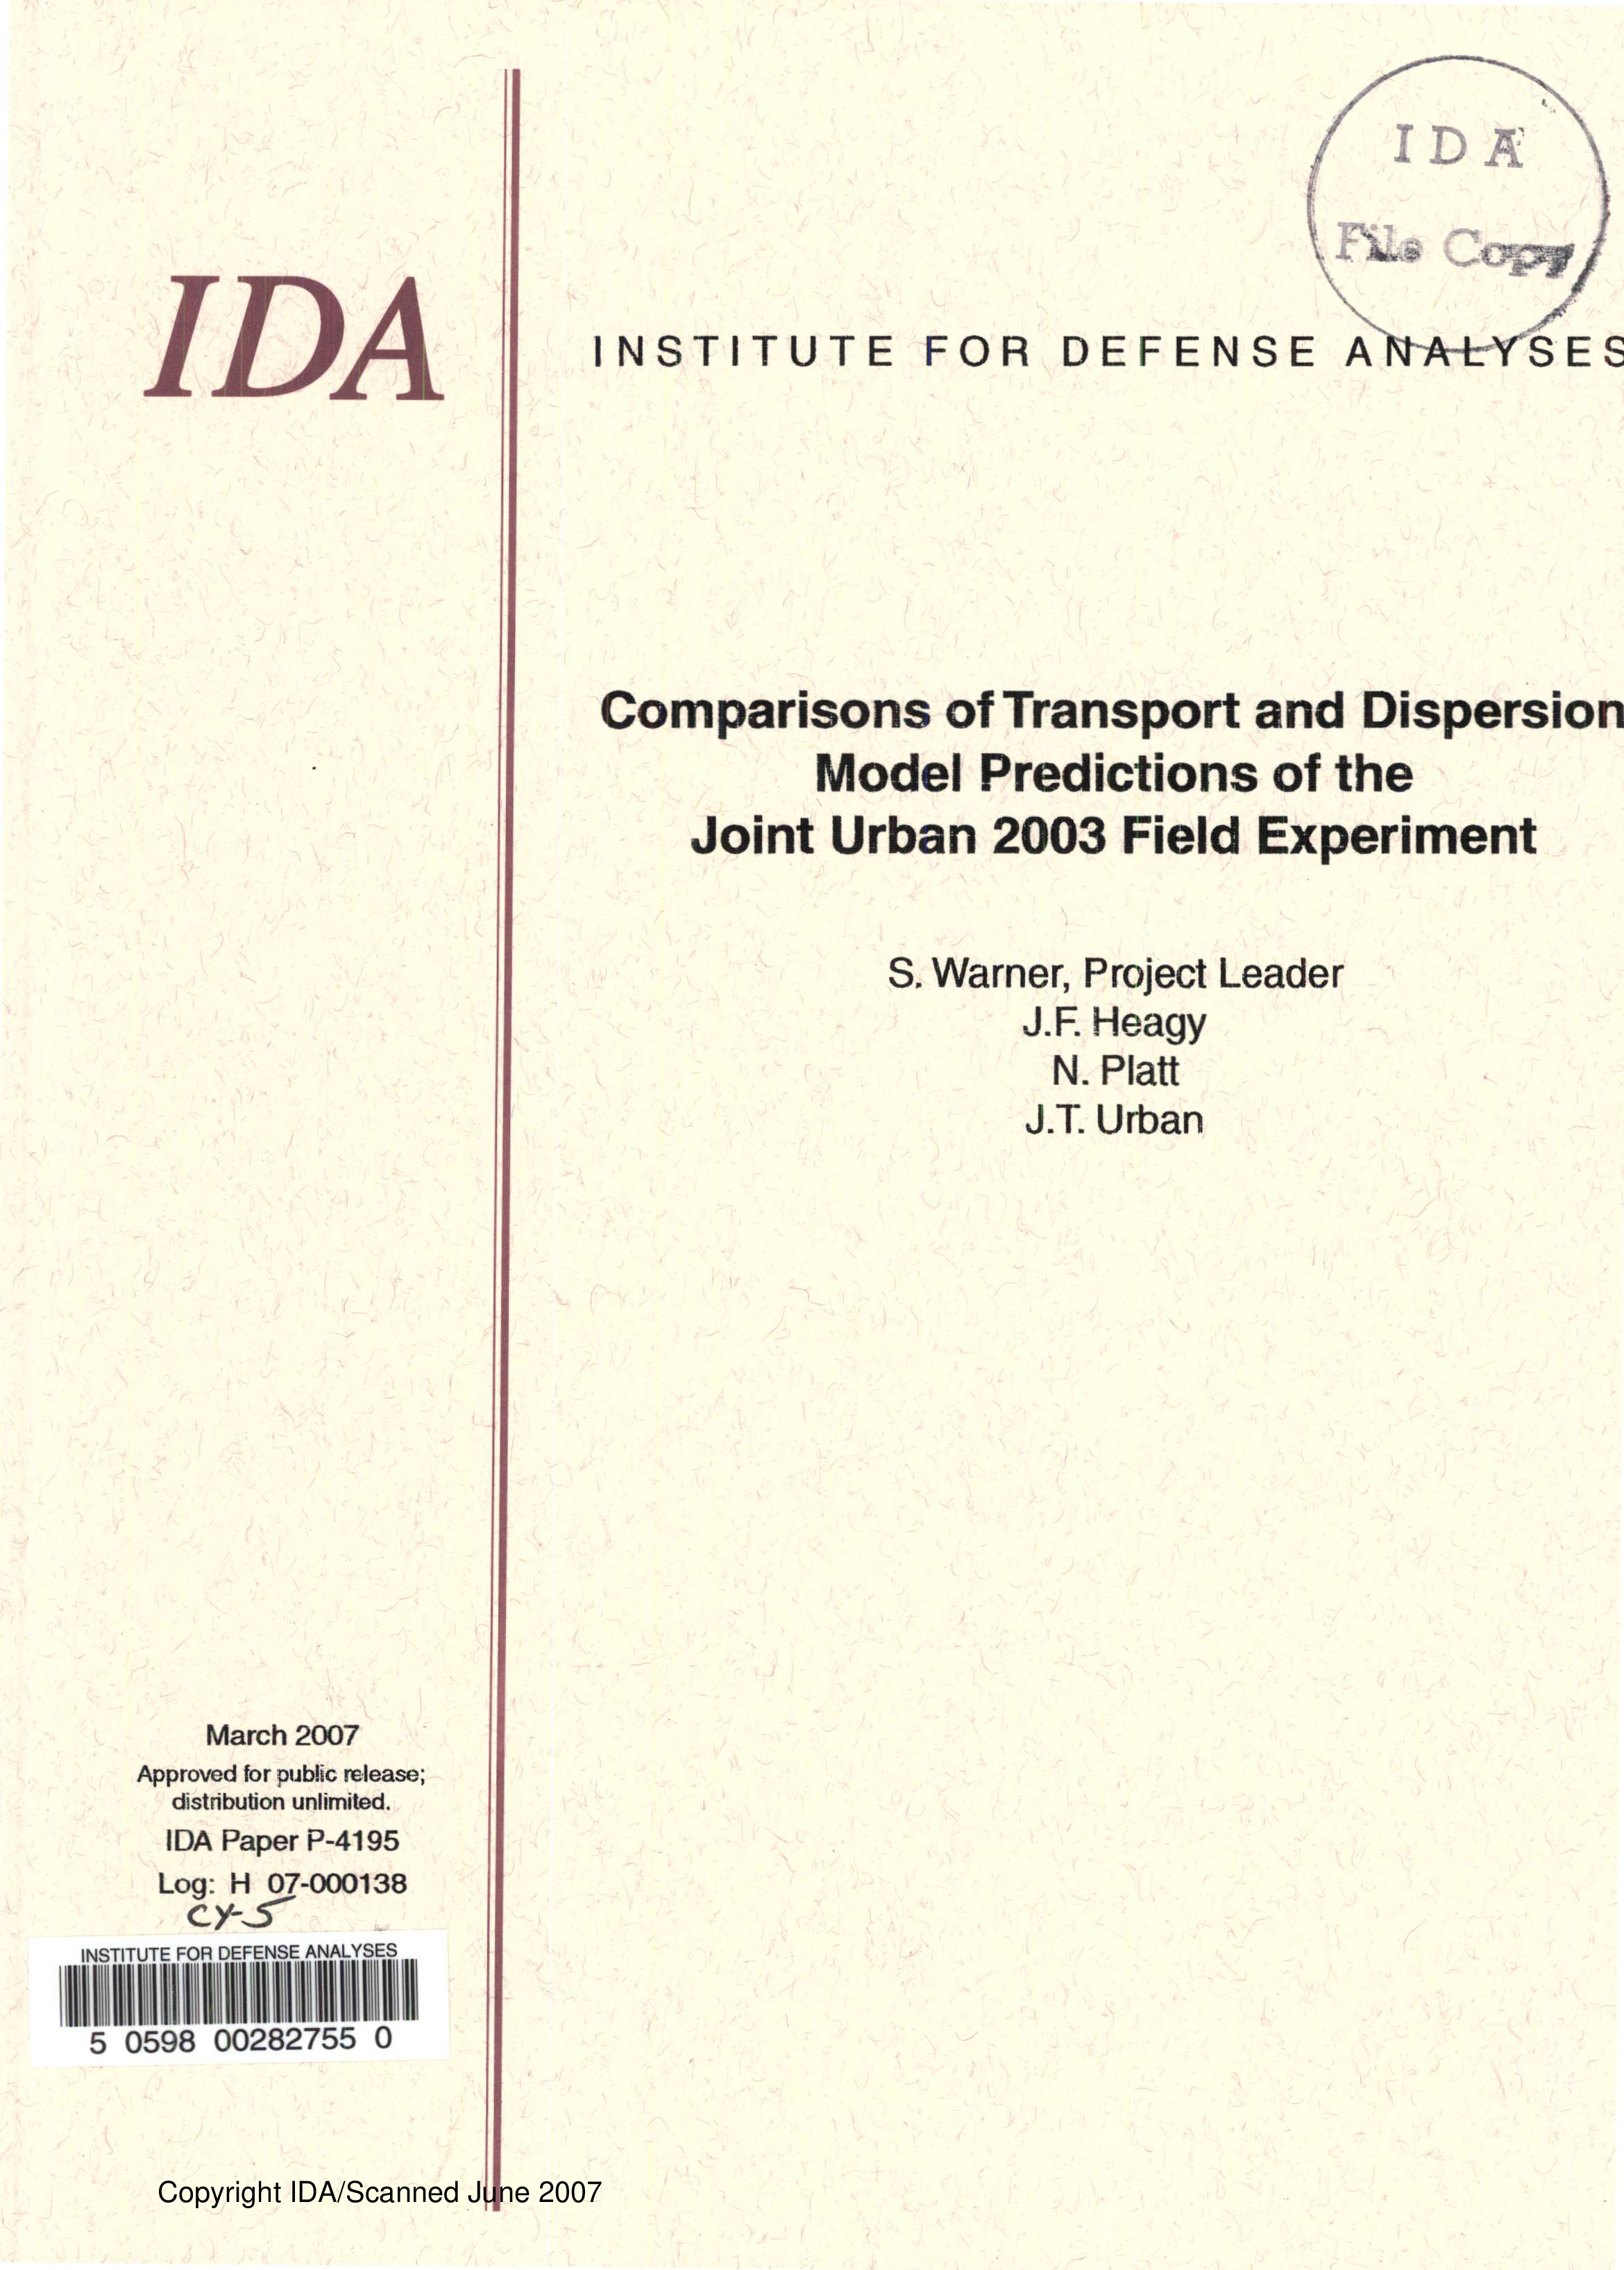 Comparisons of Transport and Dispersion Model Predictions of the Joint Urban 2003 Field Experiment